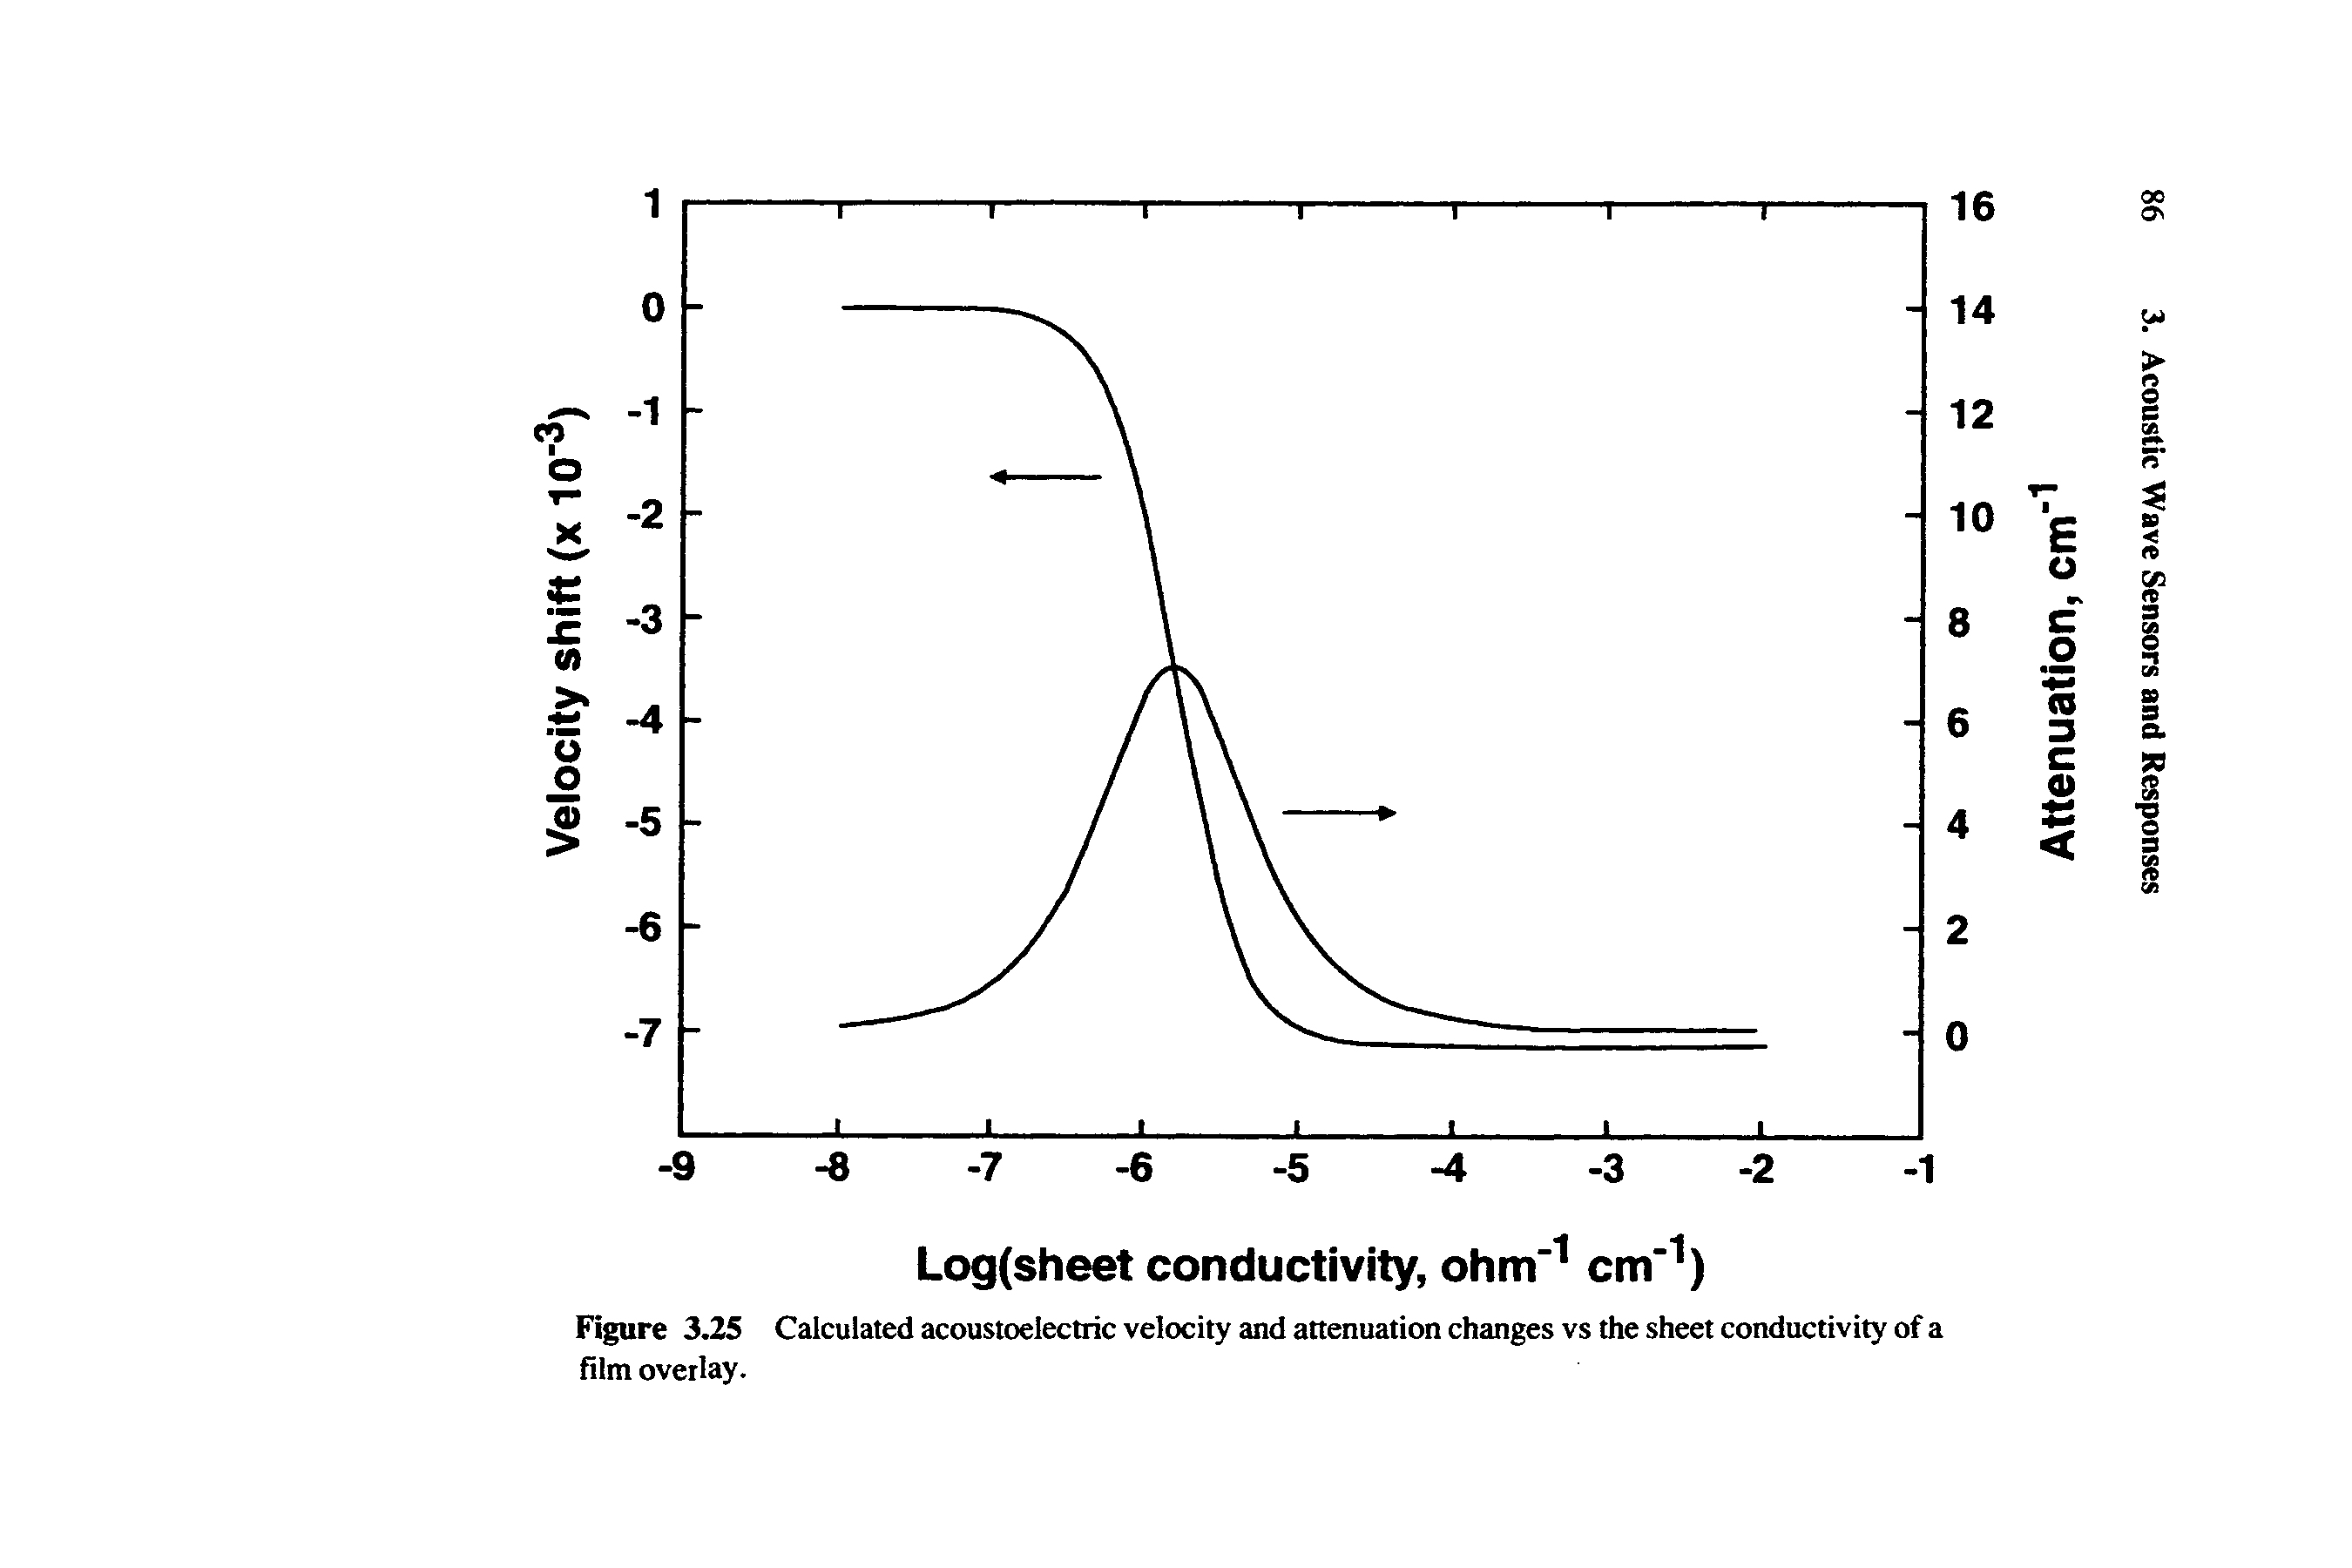 Figure 3.25 Calculated acoustoelectric velocity and attenuation changes vs the sheet conductivity of a film overlay.